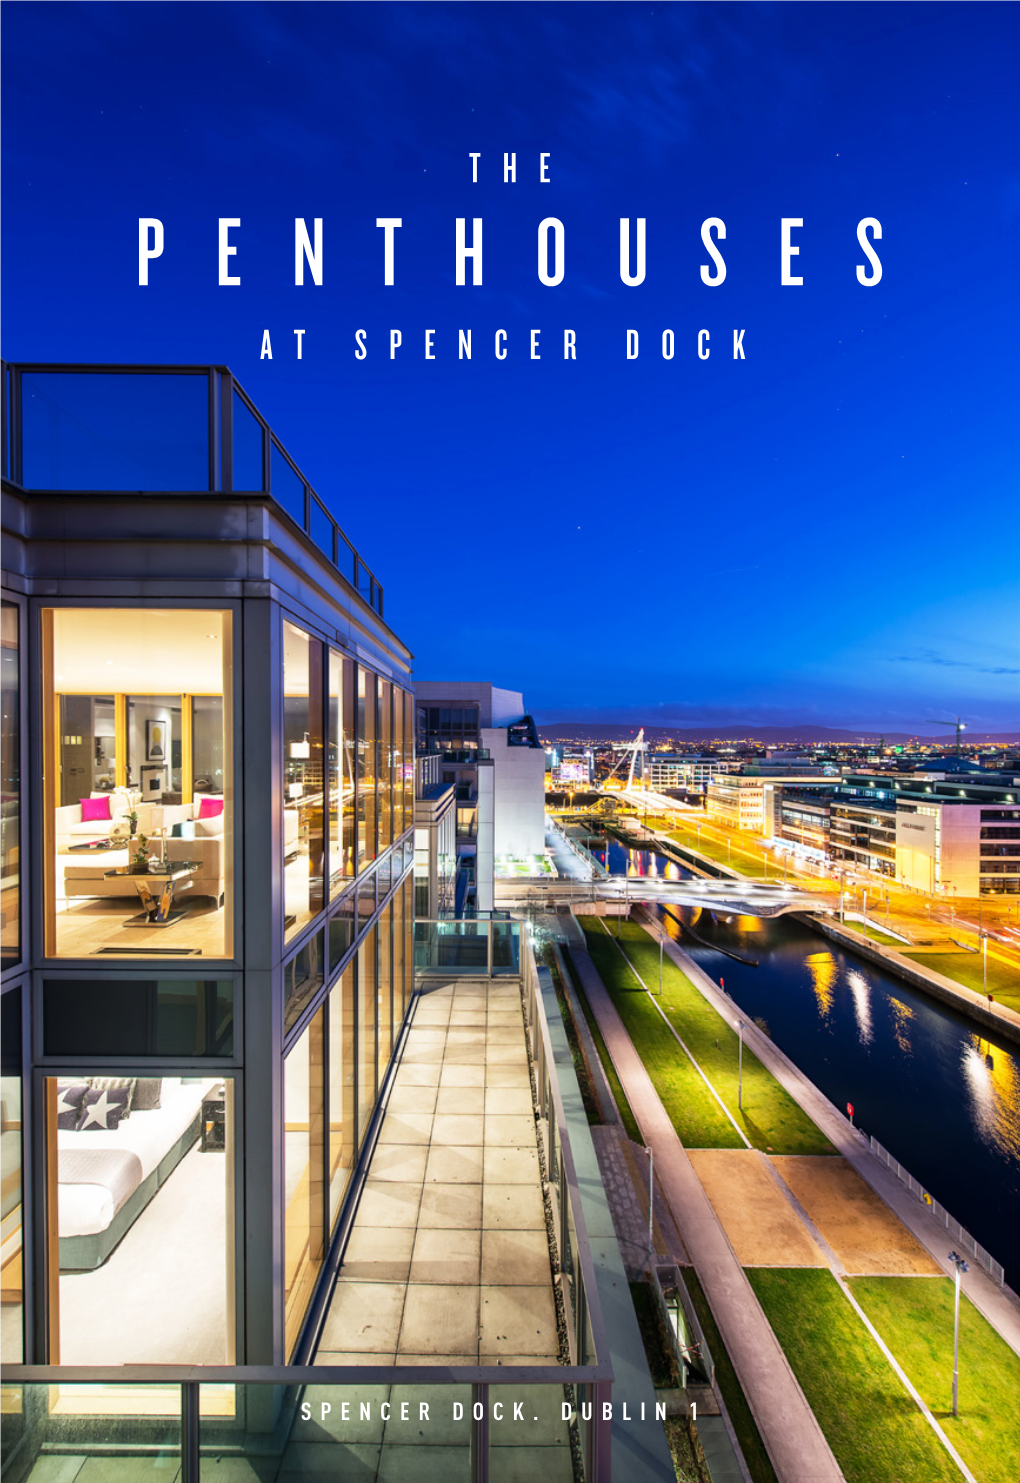 The Penthouses at Spencer Dock Surpass Expectation, Docklands with Water Features and Green Areas